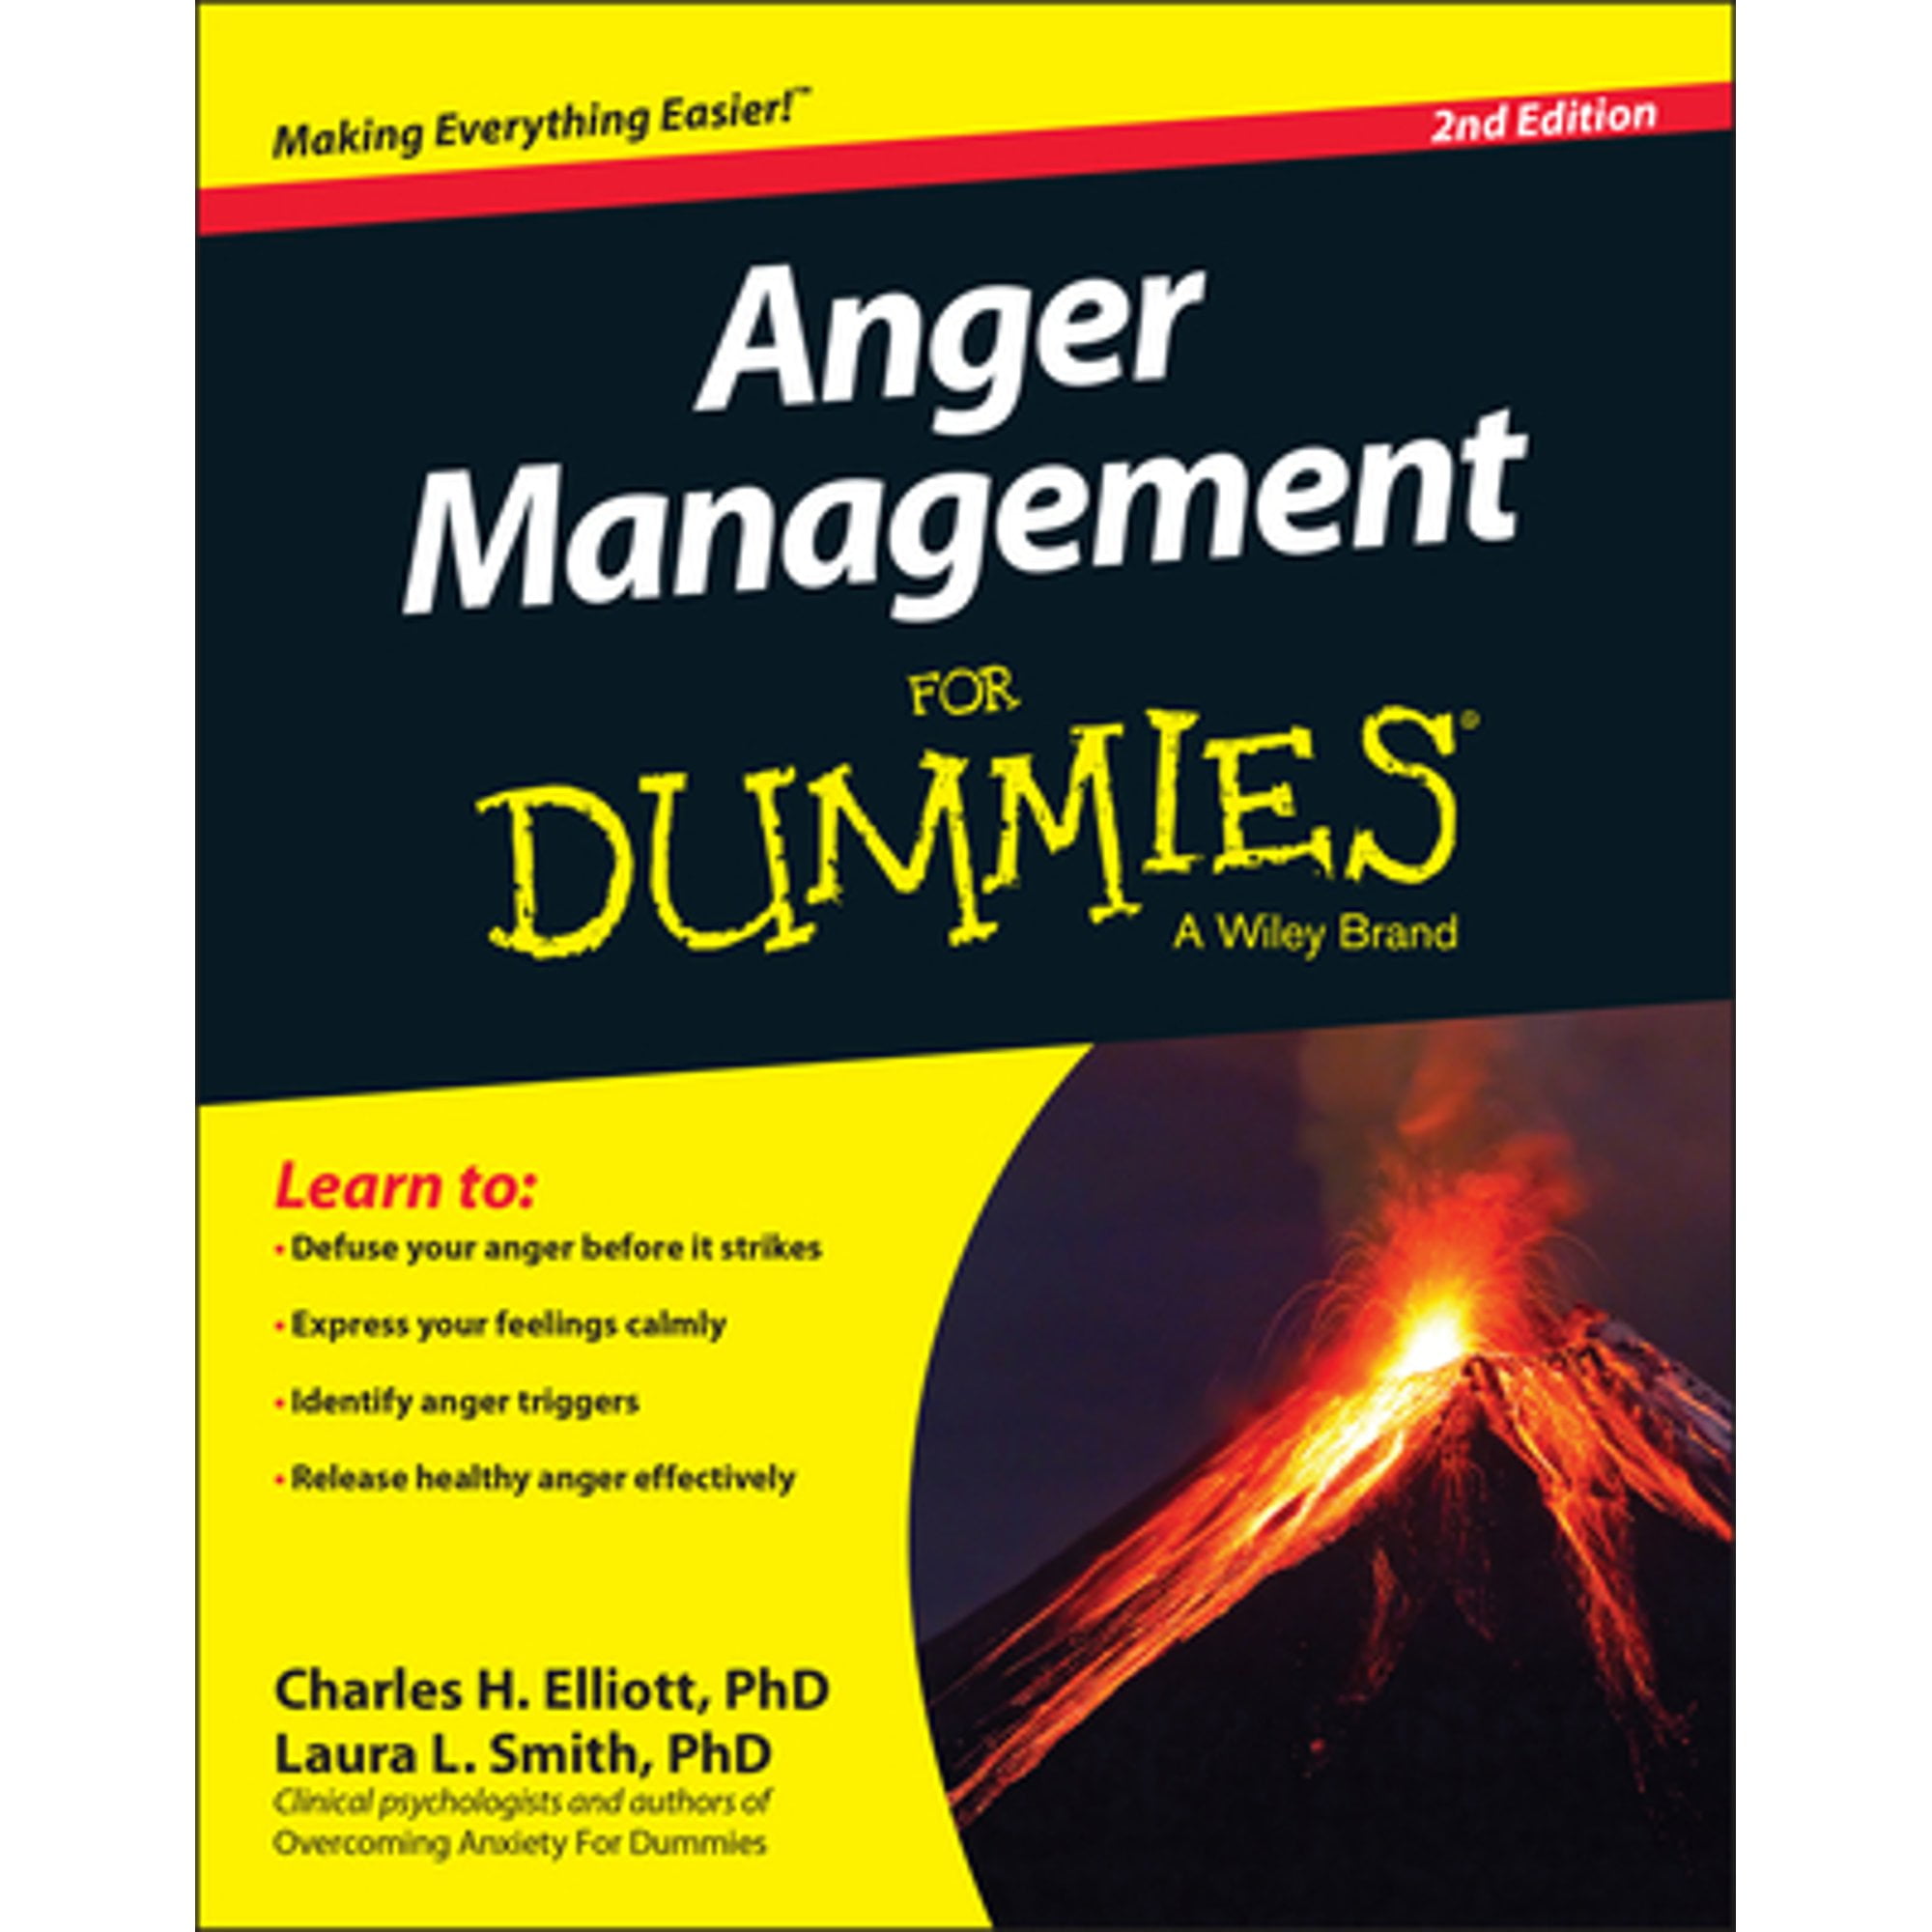 Pre-Owned Anger Management For Dummies, 2nd Edition Paperback Charles H. Elliott, Laura L. Smith, W. Doyle Gentry